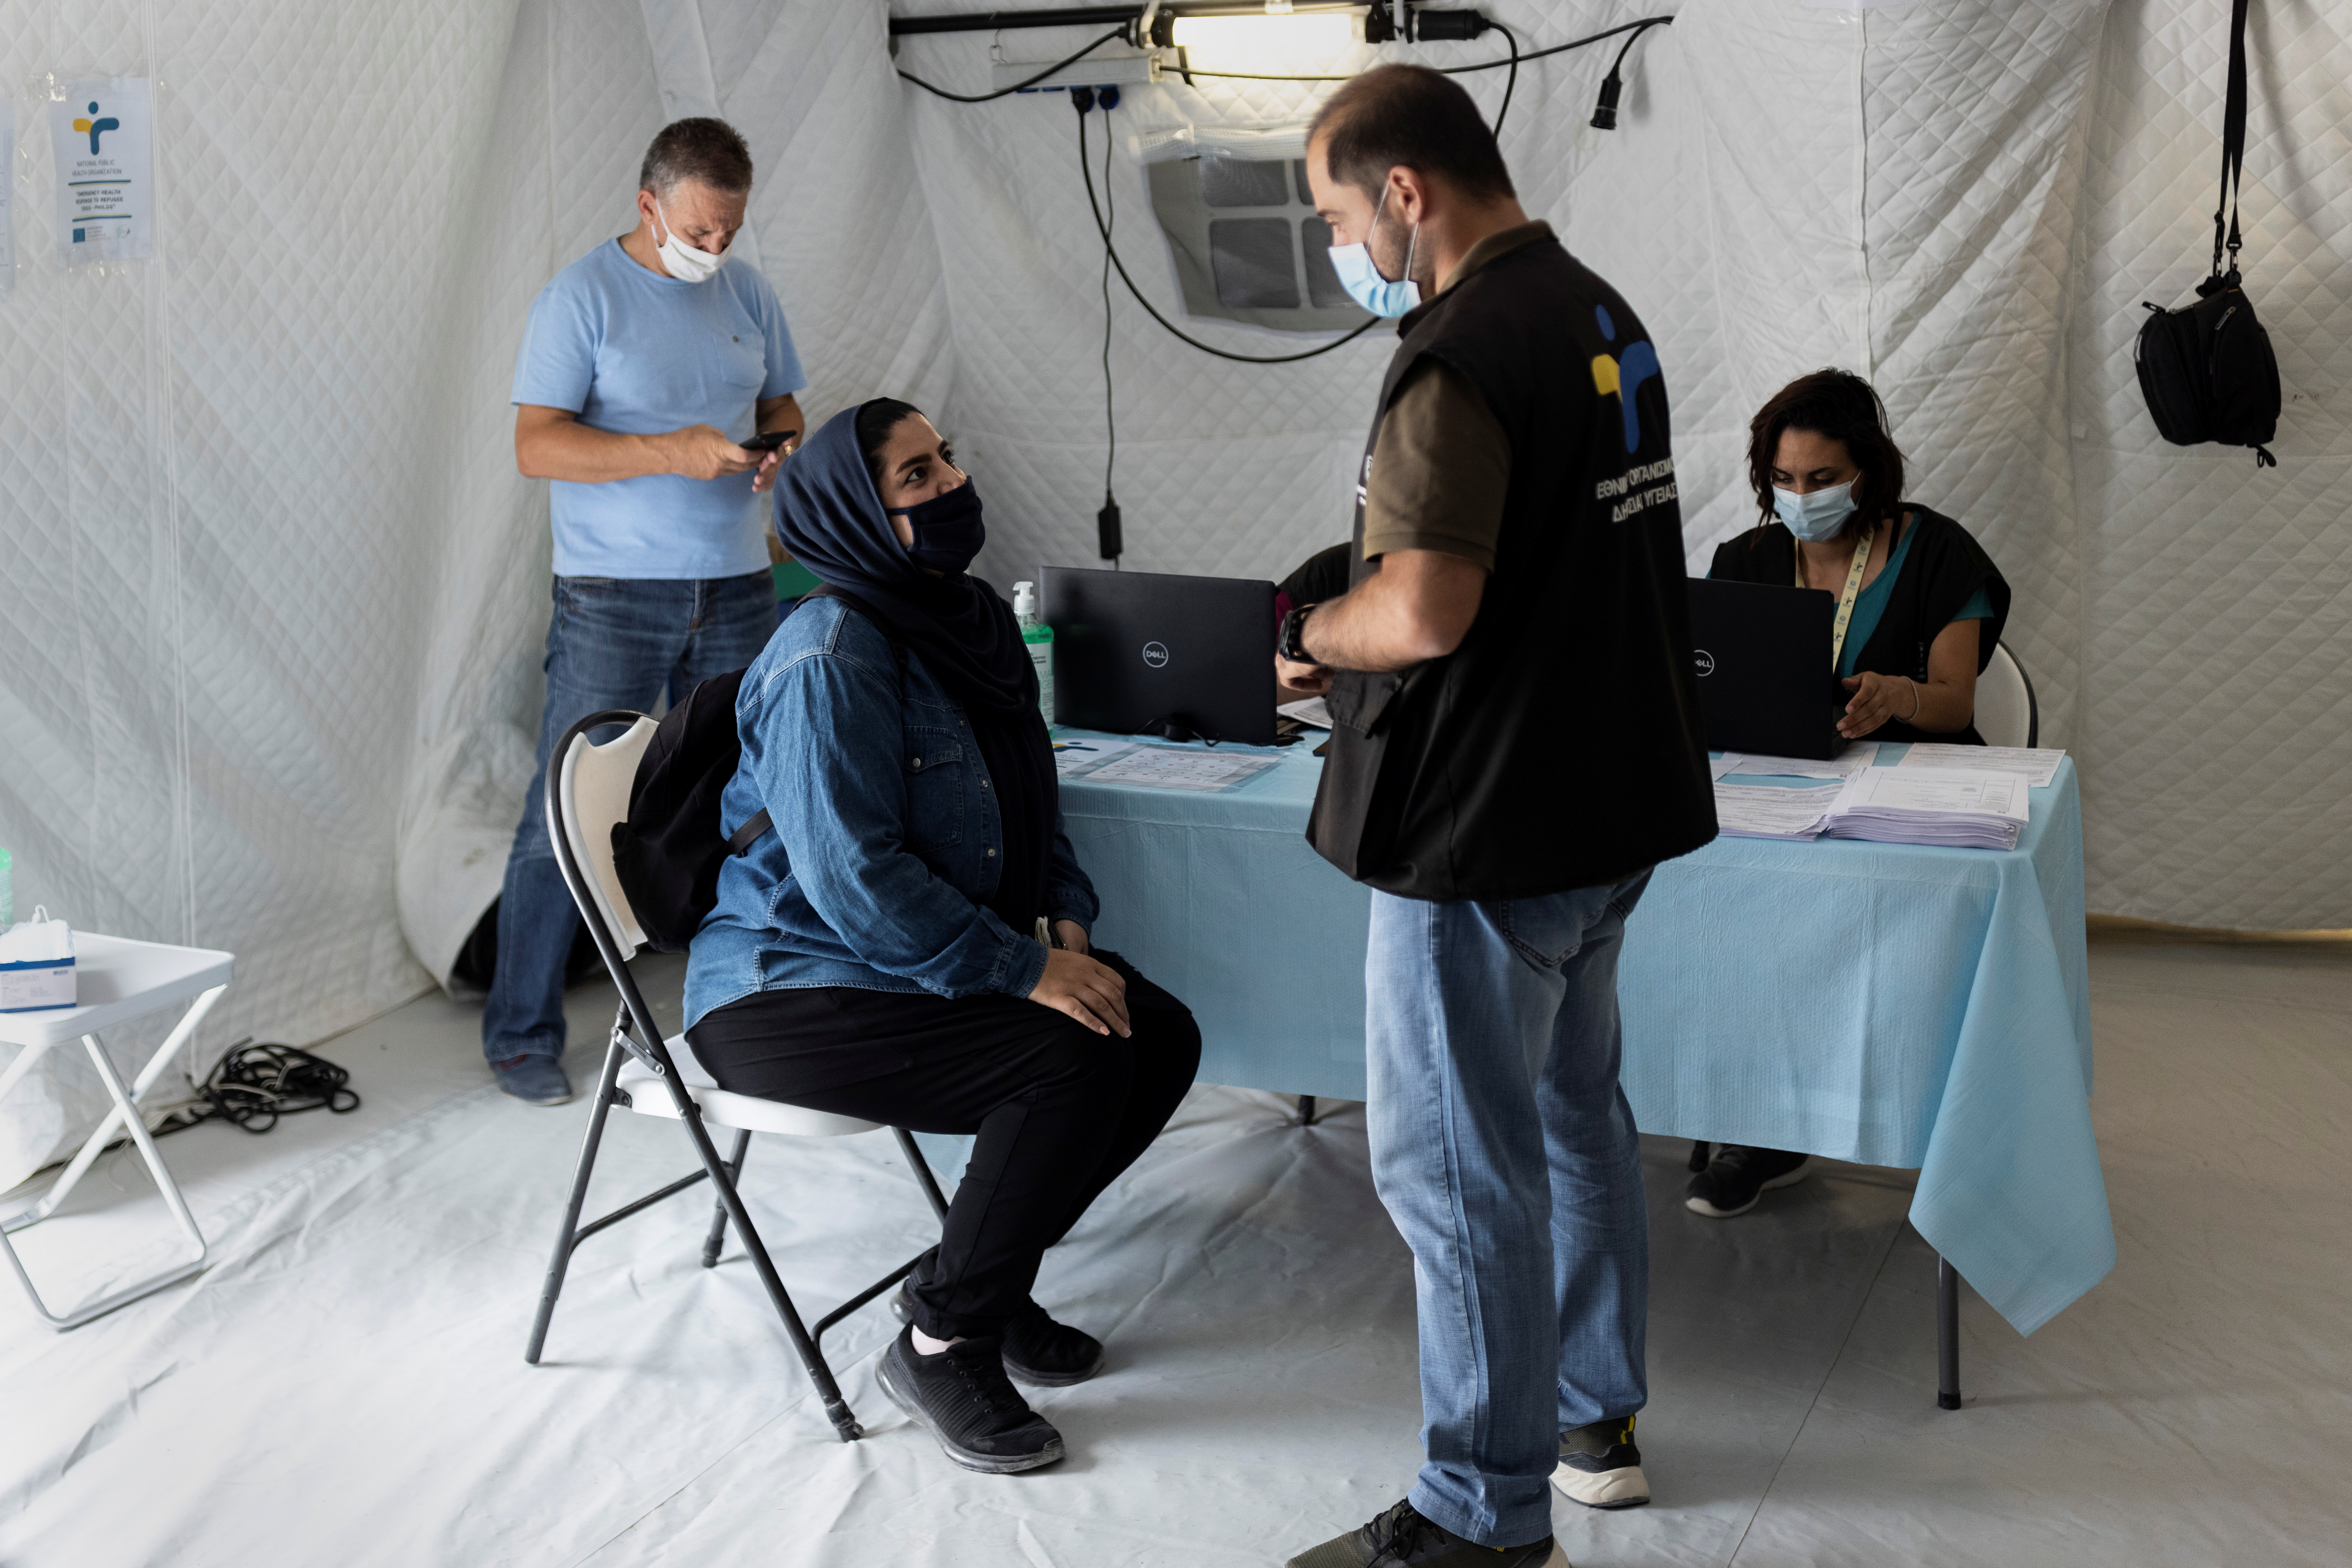 A migrant speaks with a Health ministry official before receiving a shot of the Johnson & Johnson vaccine against the coronavirus disease (COVID-19) in the Mavrovouni camp for refugees and migrants on the island of Lesbos, Greece, June 3, 2021. REUTERS/Alkis Konstantinidis